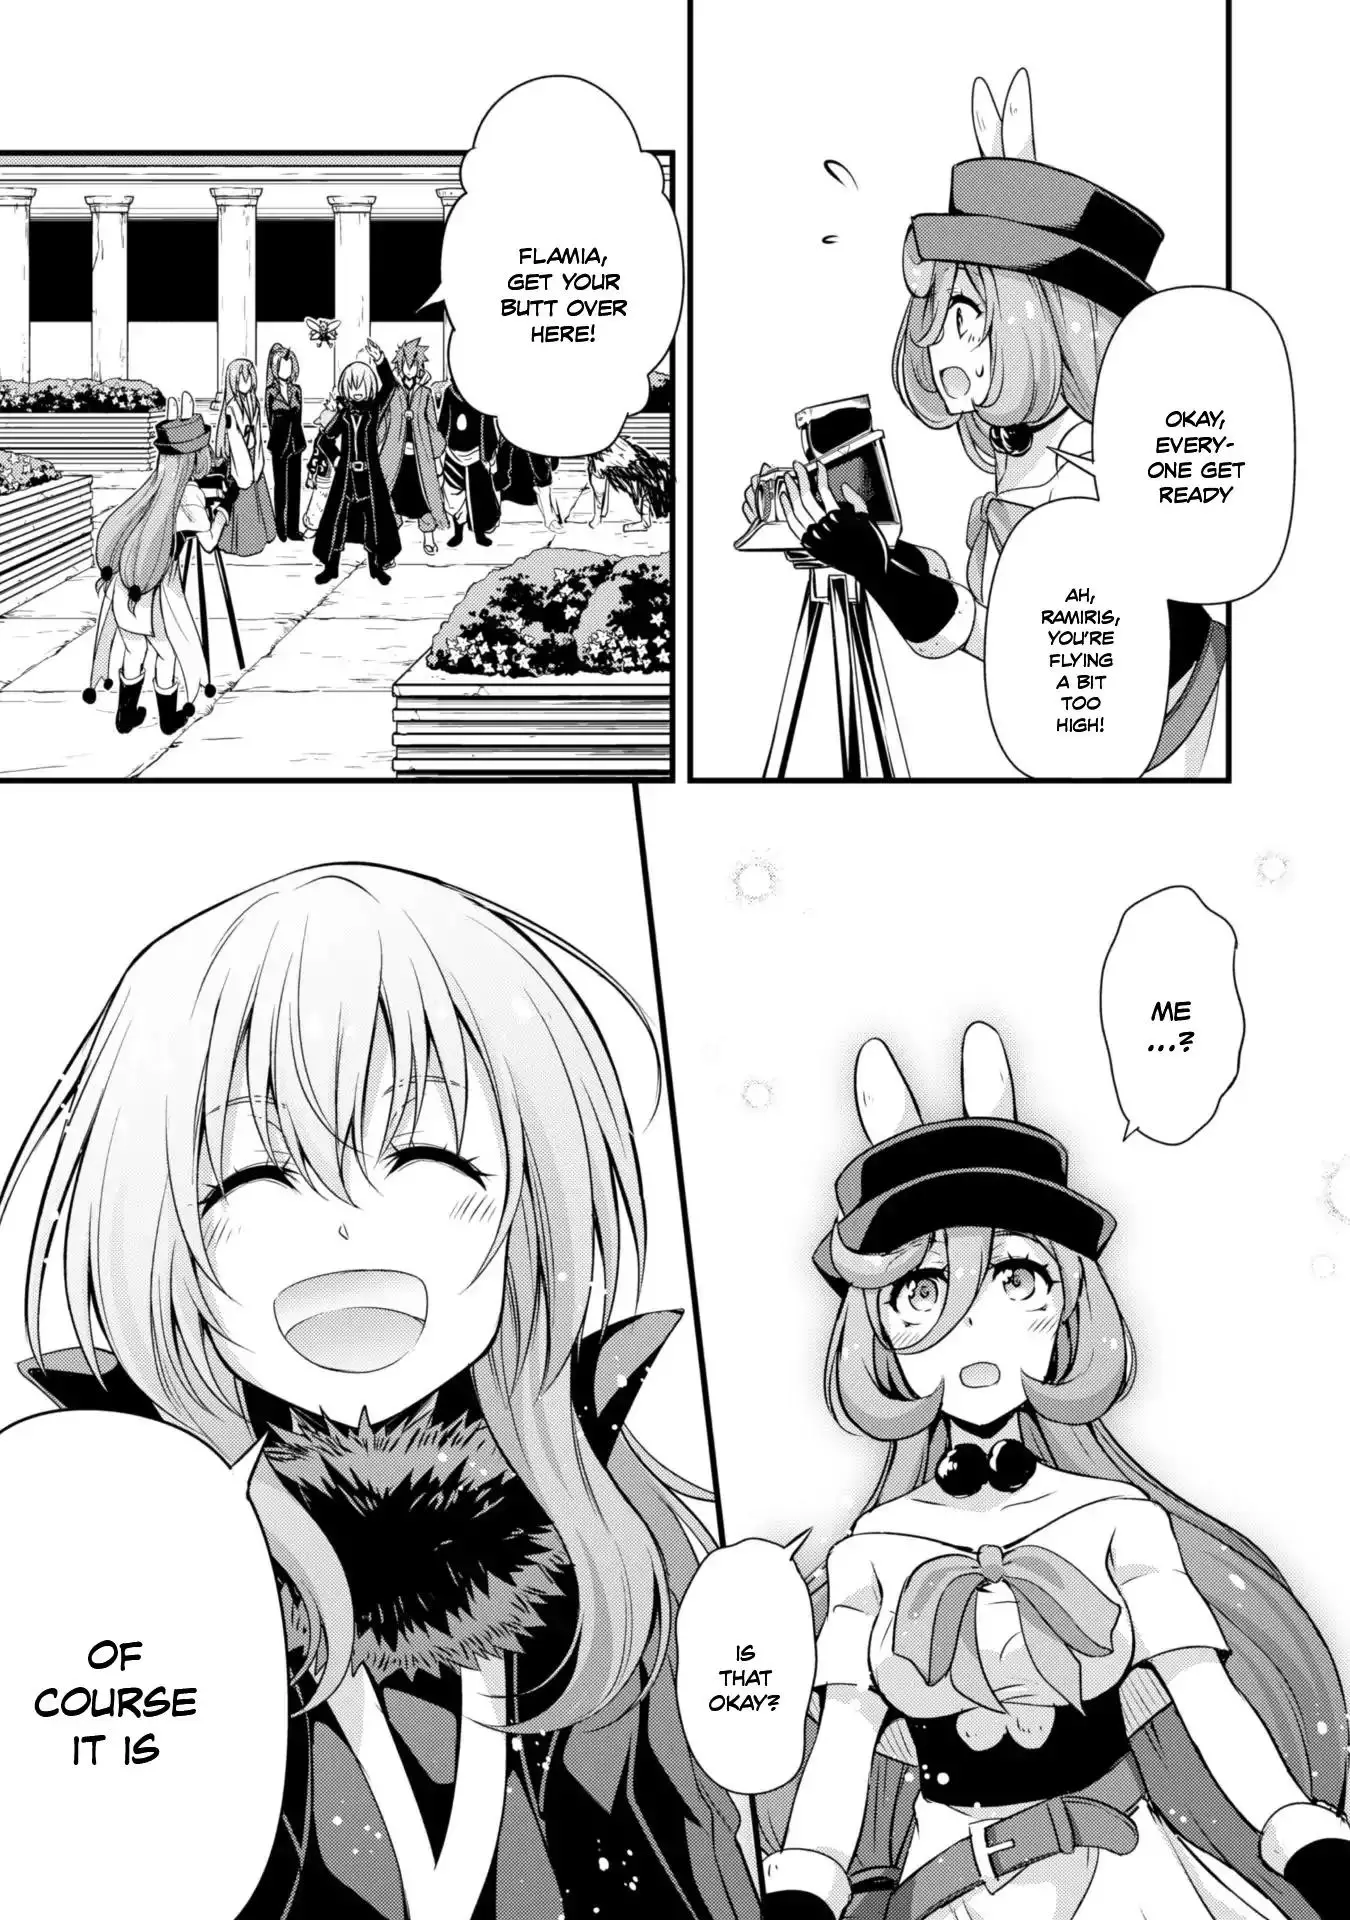 Tensei Shitara Slime Datta Ken: The Ways of Strolling in the Demon Country - 13 page 16